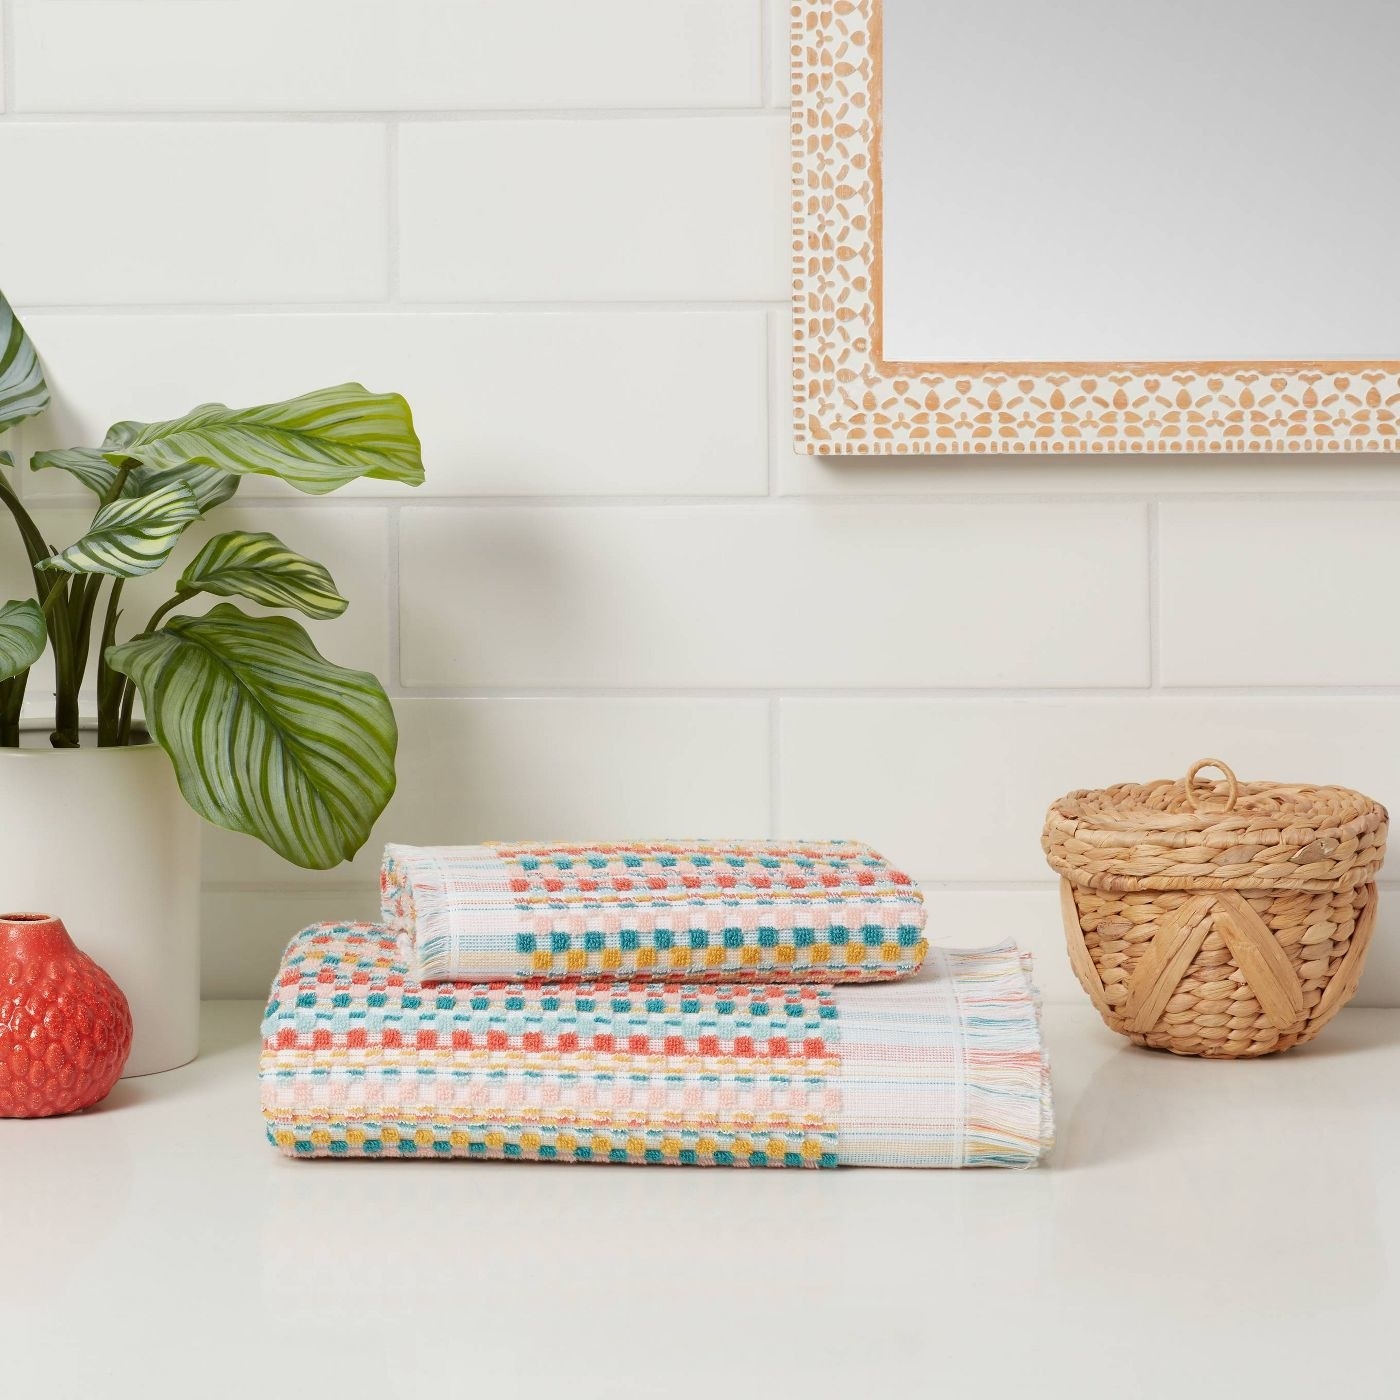 The multicolored checker-patterned towels on a counter